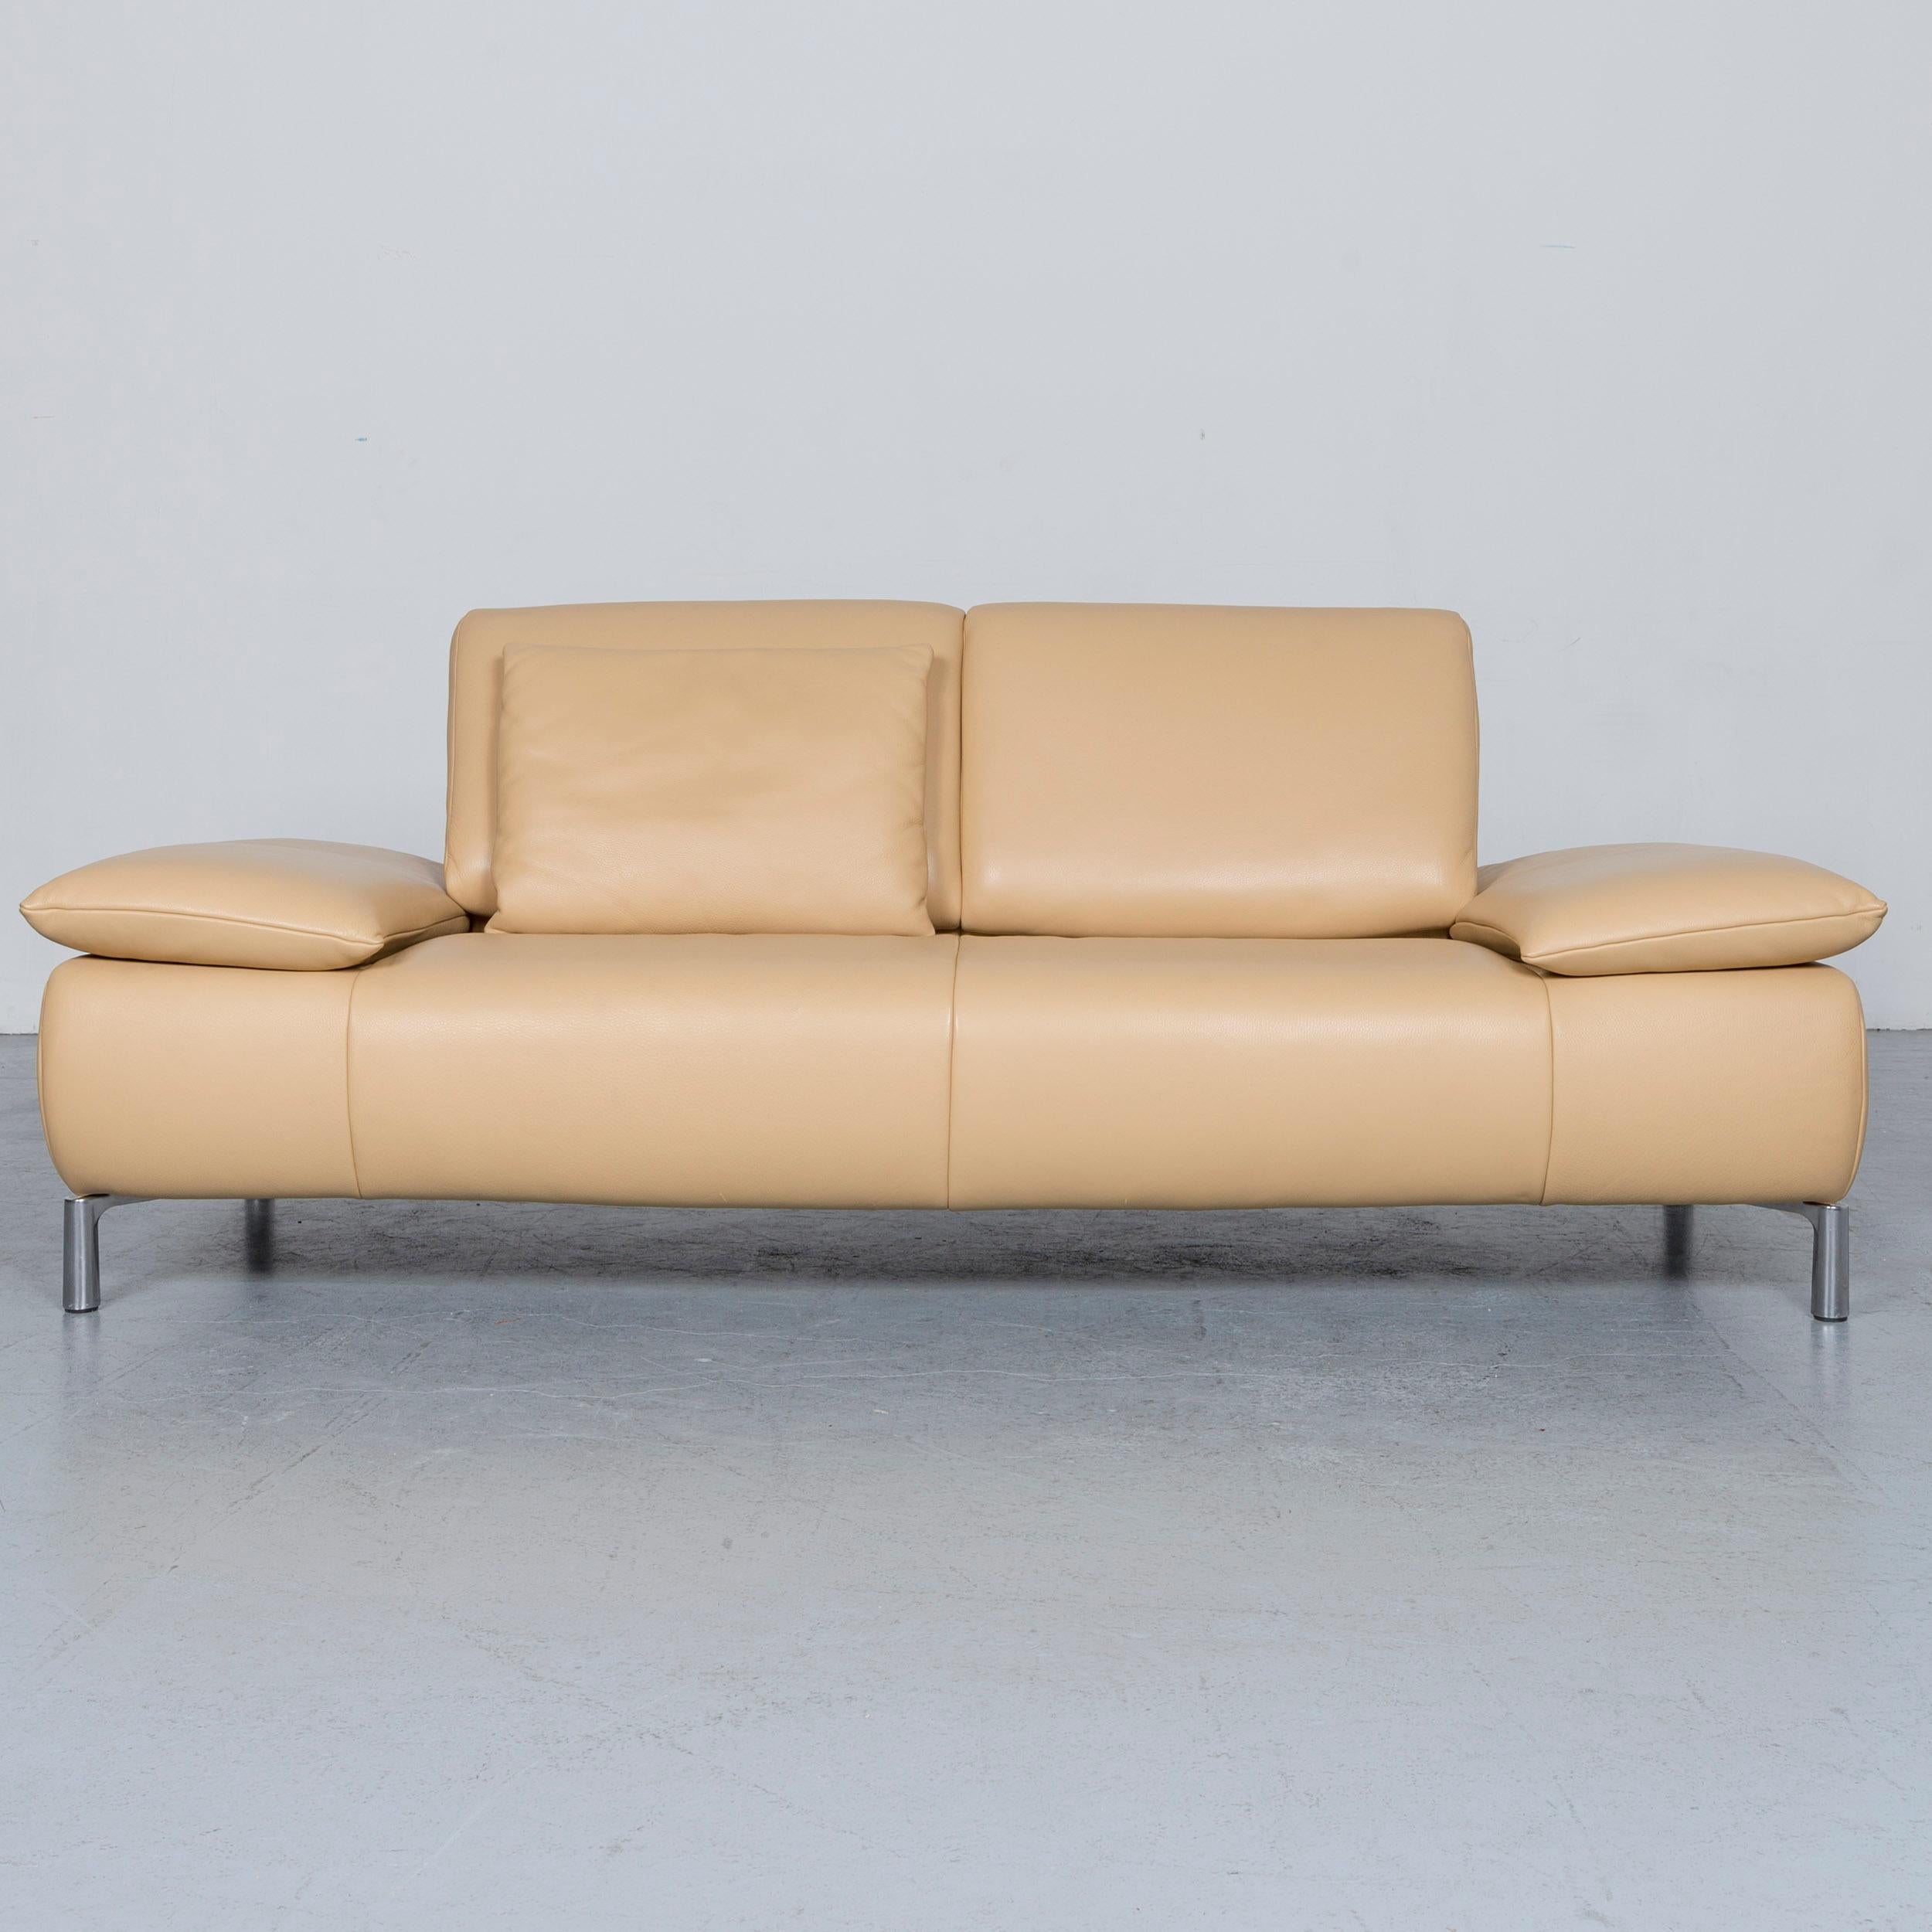 We bring to you a Koinor Koya designer leather sofa beige real leather couch.

Product measurements in centimeters:

Depth 90
Width 215
Height 85
Seat-height 42
Rest-height 55
Seat-depth 55. 



    